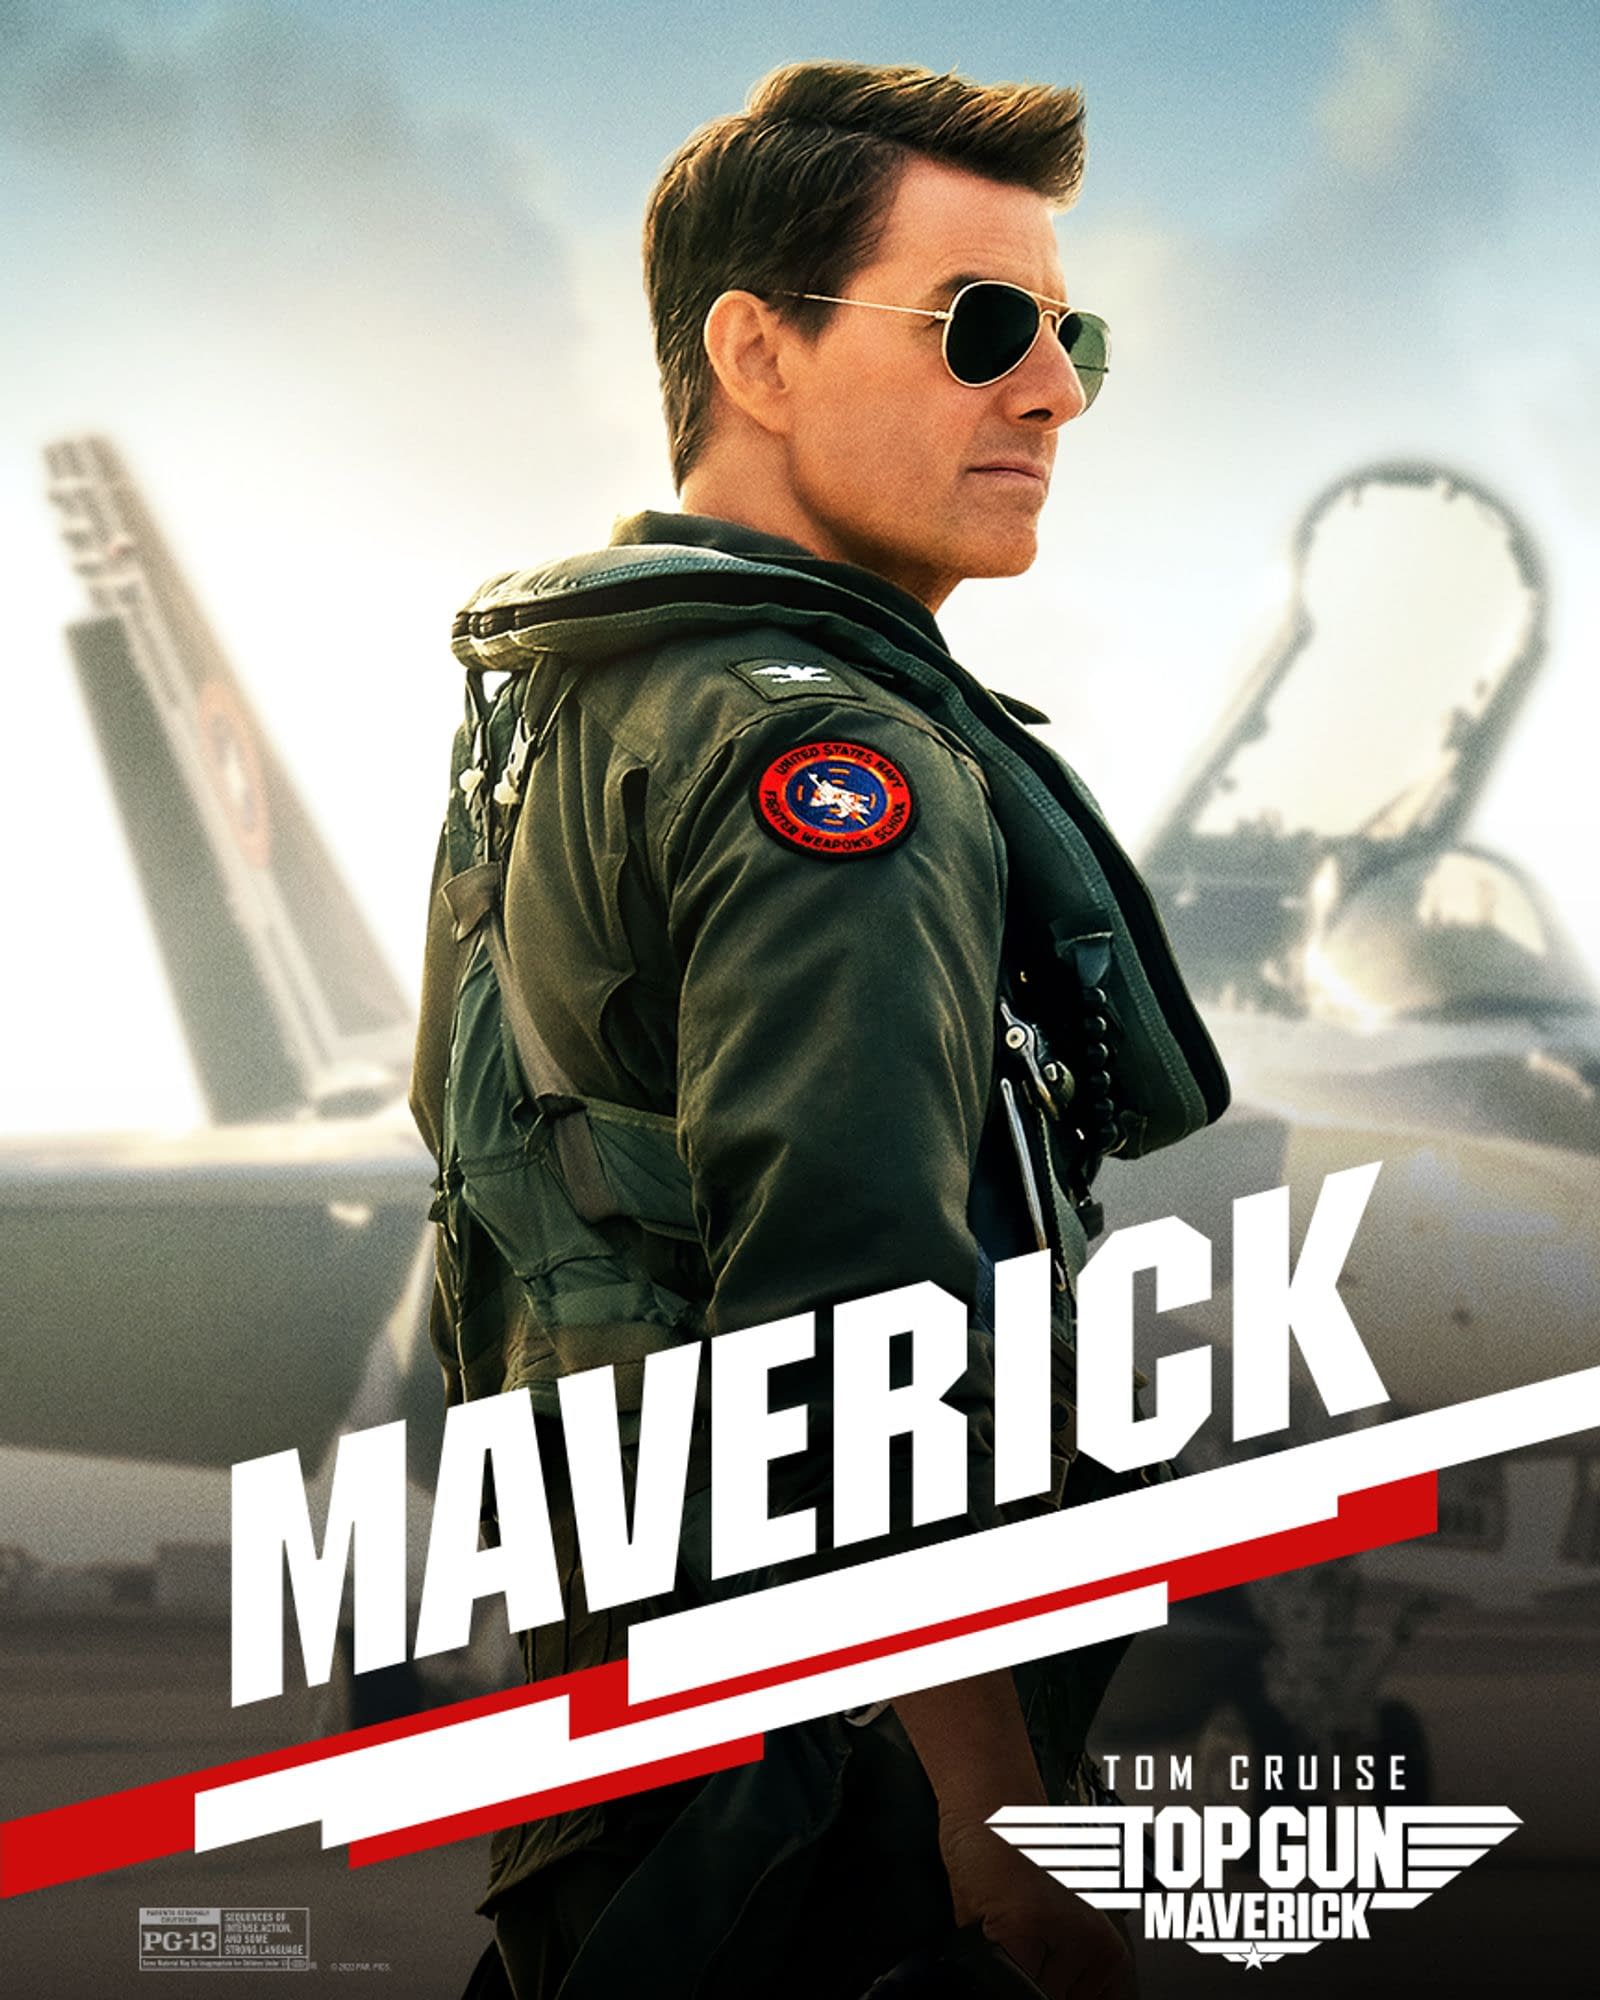 New Character Posters for Top Gun: Maverick Shows Off the Call Signs